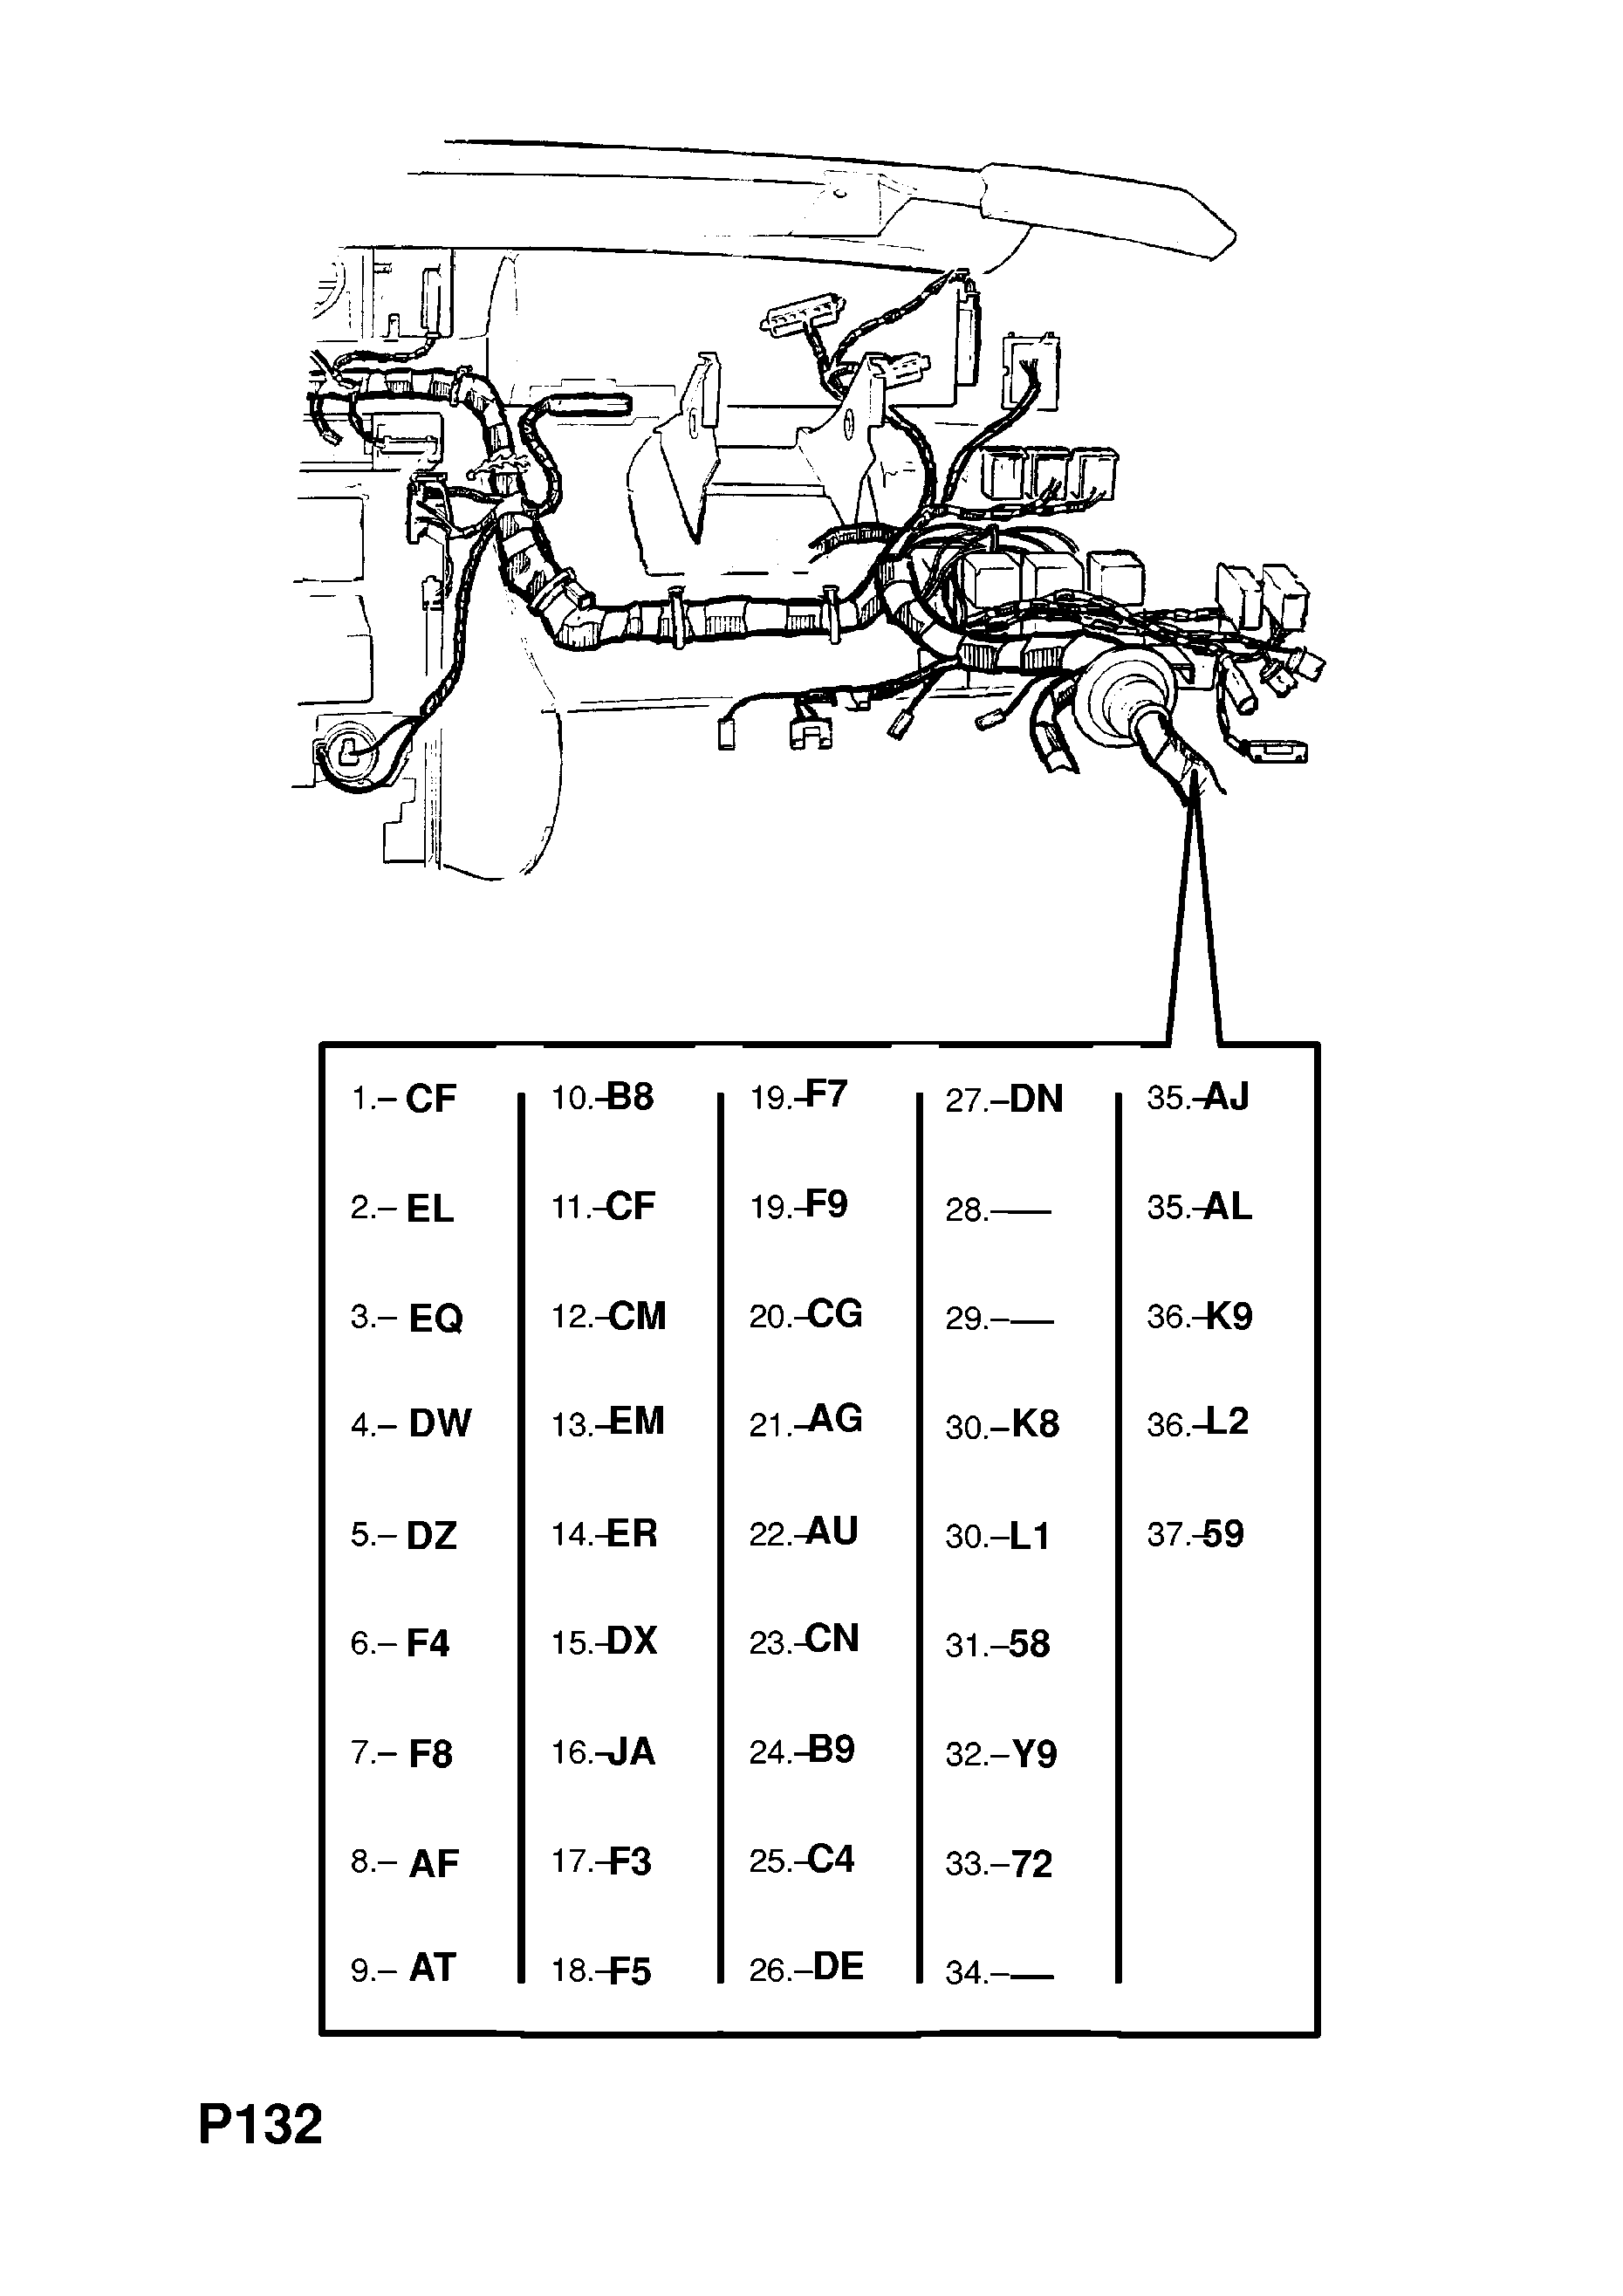 INSTRUMENT PANEL WIRING HARNESS (CONTD.) <small><i>[H1000001-L1999999 FOR AIR CONDITIONING, MANUAL TRANSMISSION EXCEPT LCD INSTRUMENTS]</i></small>